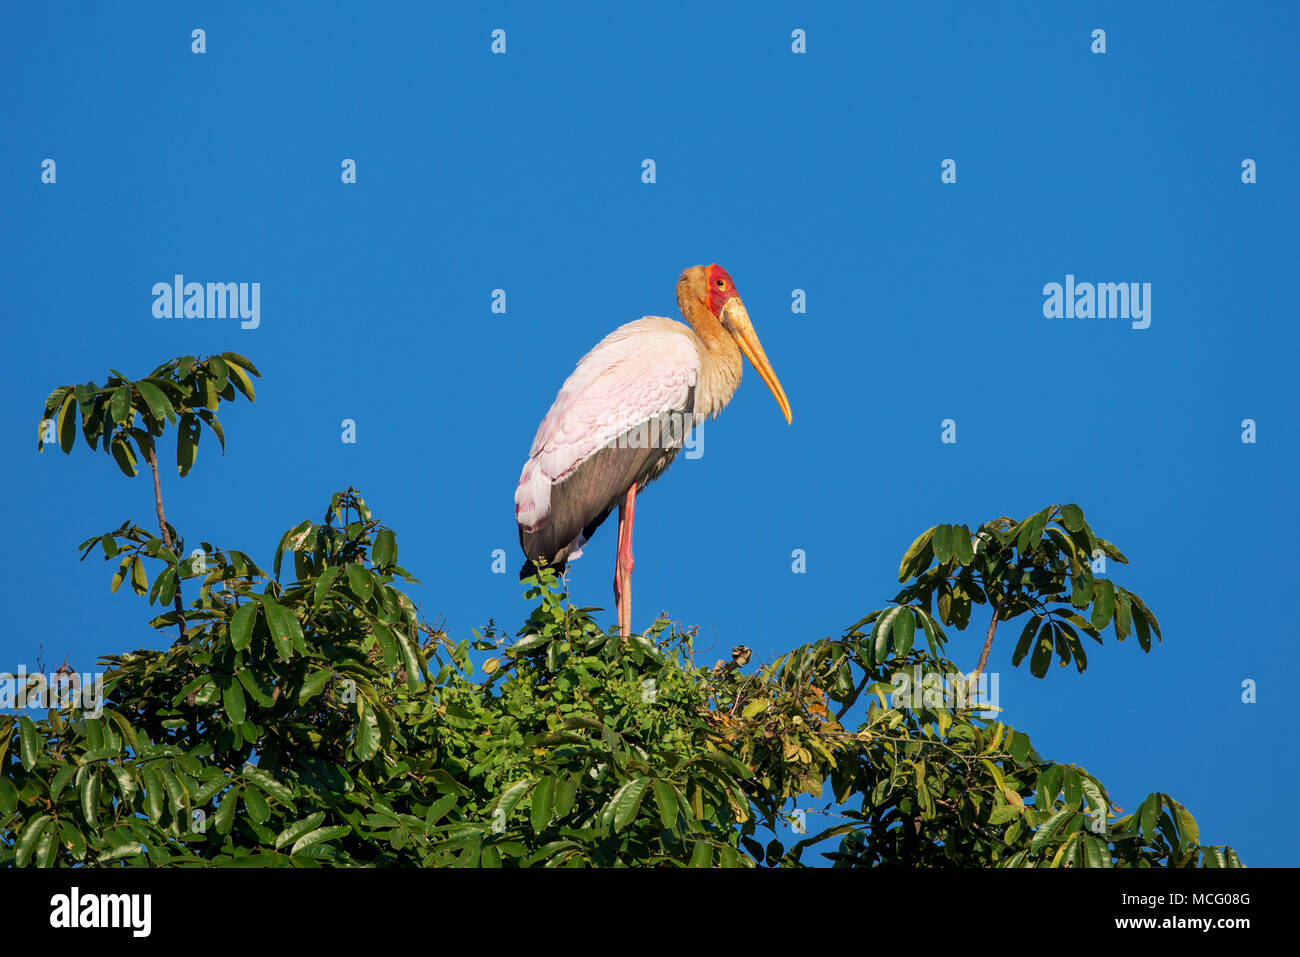 YELLOW BILLED STORK (MYCTERIA IBIS) PERCHED ON TREE TOP Stock Photo